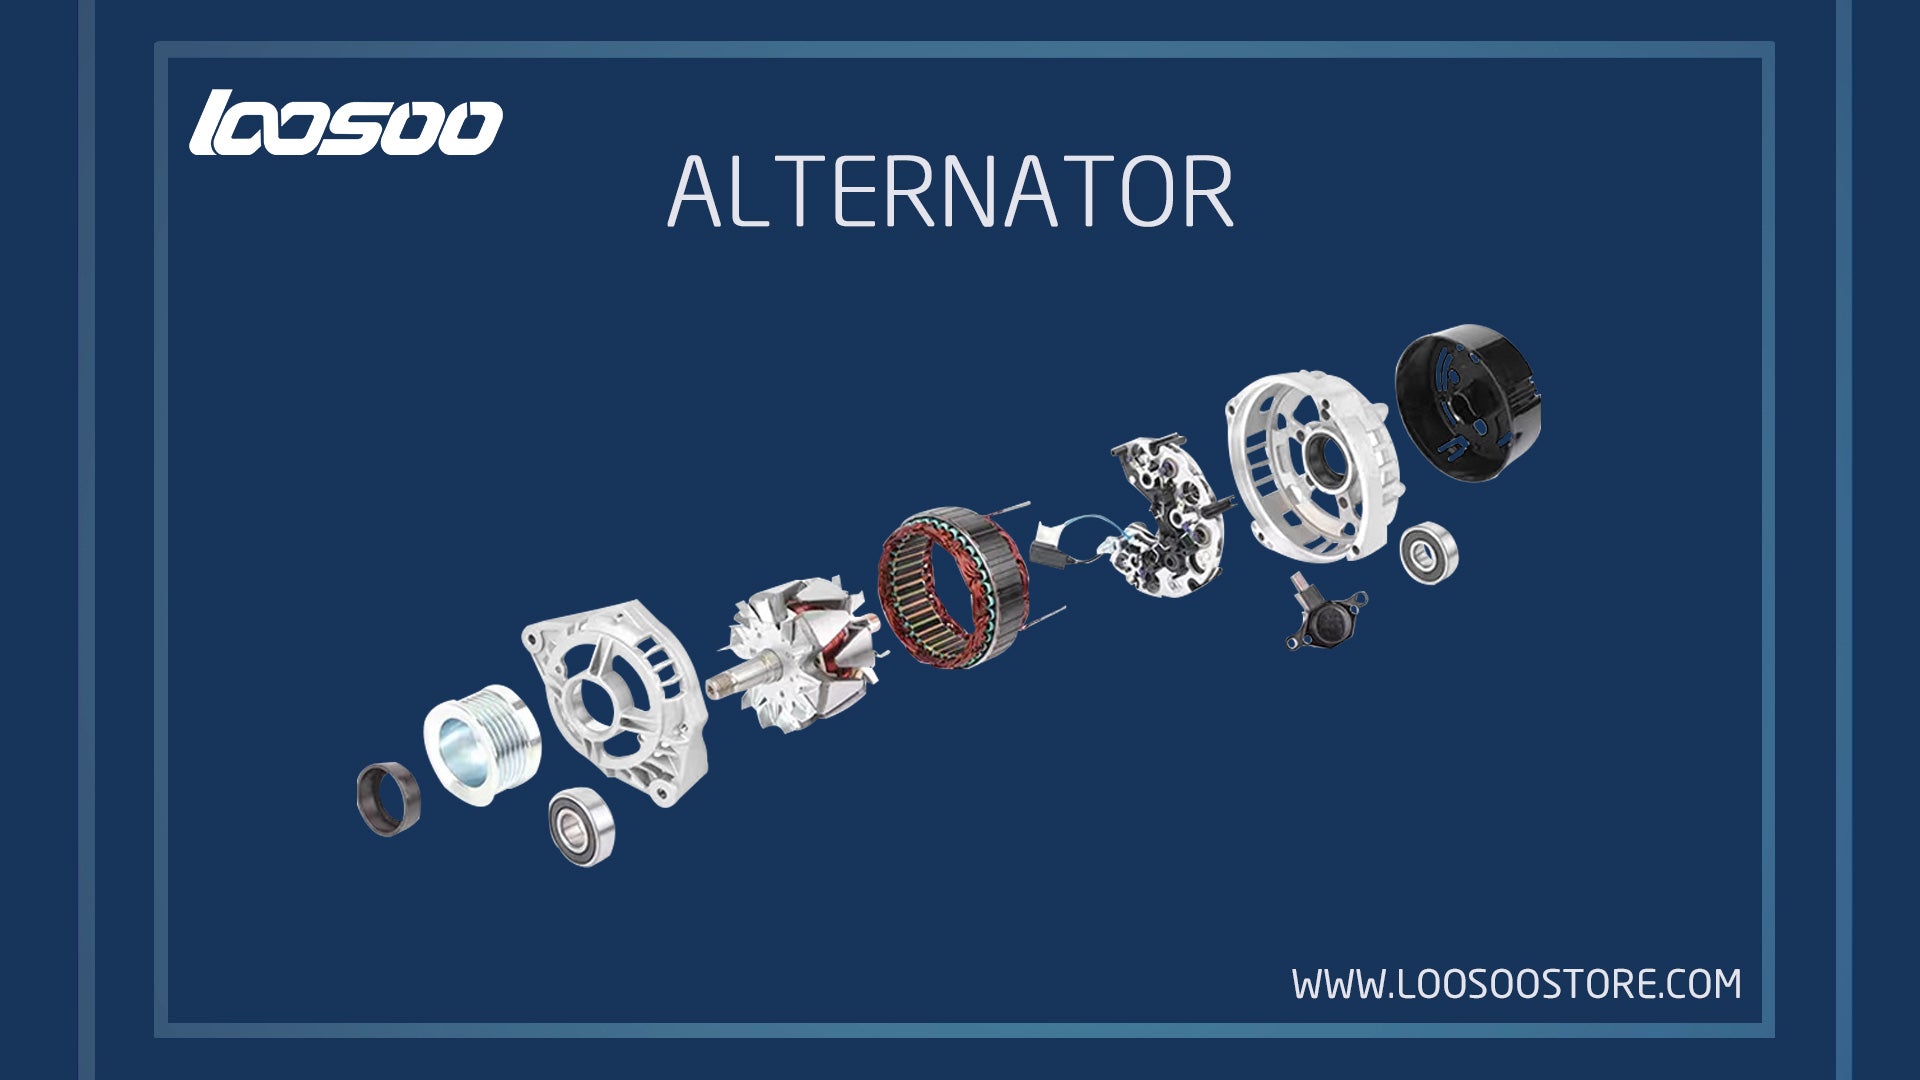 "*OEM & AFTERMARKET* Loosoo high-quality car alternators come with various OE numbers to suit most car models. We are the OEM for more than 70% of the main engines in China. Therefore, customers can trust our product quality in the aftermarket." "*HIGH PERFORMANCE*  We inspect the raw material and each production process rigorously to make sure our alternator motor passes the 100% final tests to lower the risk of any imperfect products going to market." "*QUALITY GUARANTY* Covered by a 2-year warranty, a fast and proactive team is at your service to assist you through each step of ordering if needed." "*CERTIFICATIONS* We have introduced sophisticated testing equipment for support and invested a lot of energy into passing strict third-party inspections and certifications, such as IATF16949, CE, etc." "The Producing Details of Loosoo High Output Alternator • Epoxy resin is painted to enhance the insulation of the copper wire and make the power generation more stable. • The rotors are polished by a precise automatic polishing machine to guarantee the conductivity and stability of the products. • Each alternator comes with a test report. Only when the product has passed the test, will the report come out." "Why Choose LOOSOO High-end Alternators? Loosoo has more than 30 years of manufacturing experience with the best alternators. As a strong and solid company, we strive to provide our business partners with the most valuable products to maintain a prosperous and sustainable relationship in the long term." For more information, please send your inquiry, we will come back to you in the shortest time. LOOSOO, your auto parts.